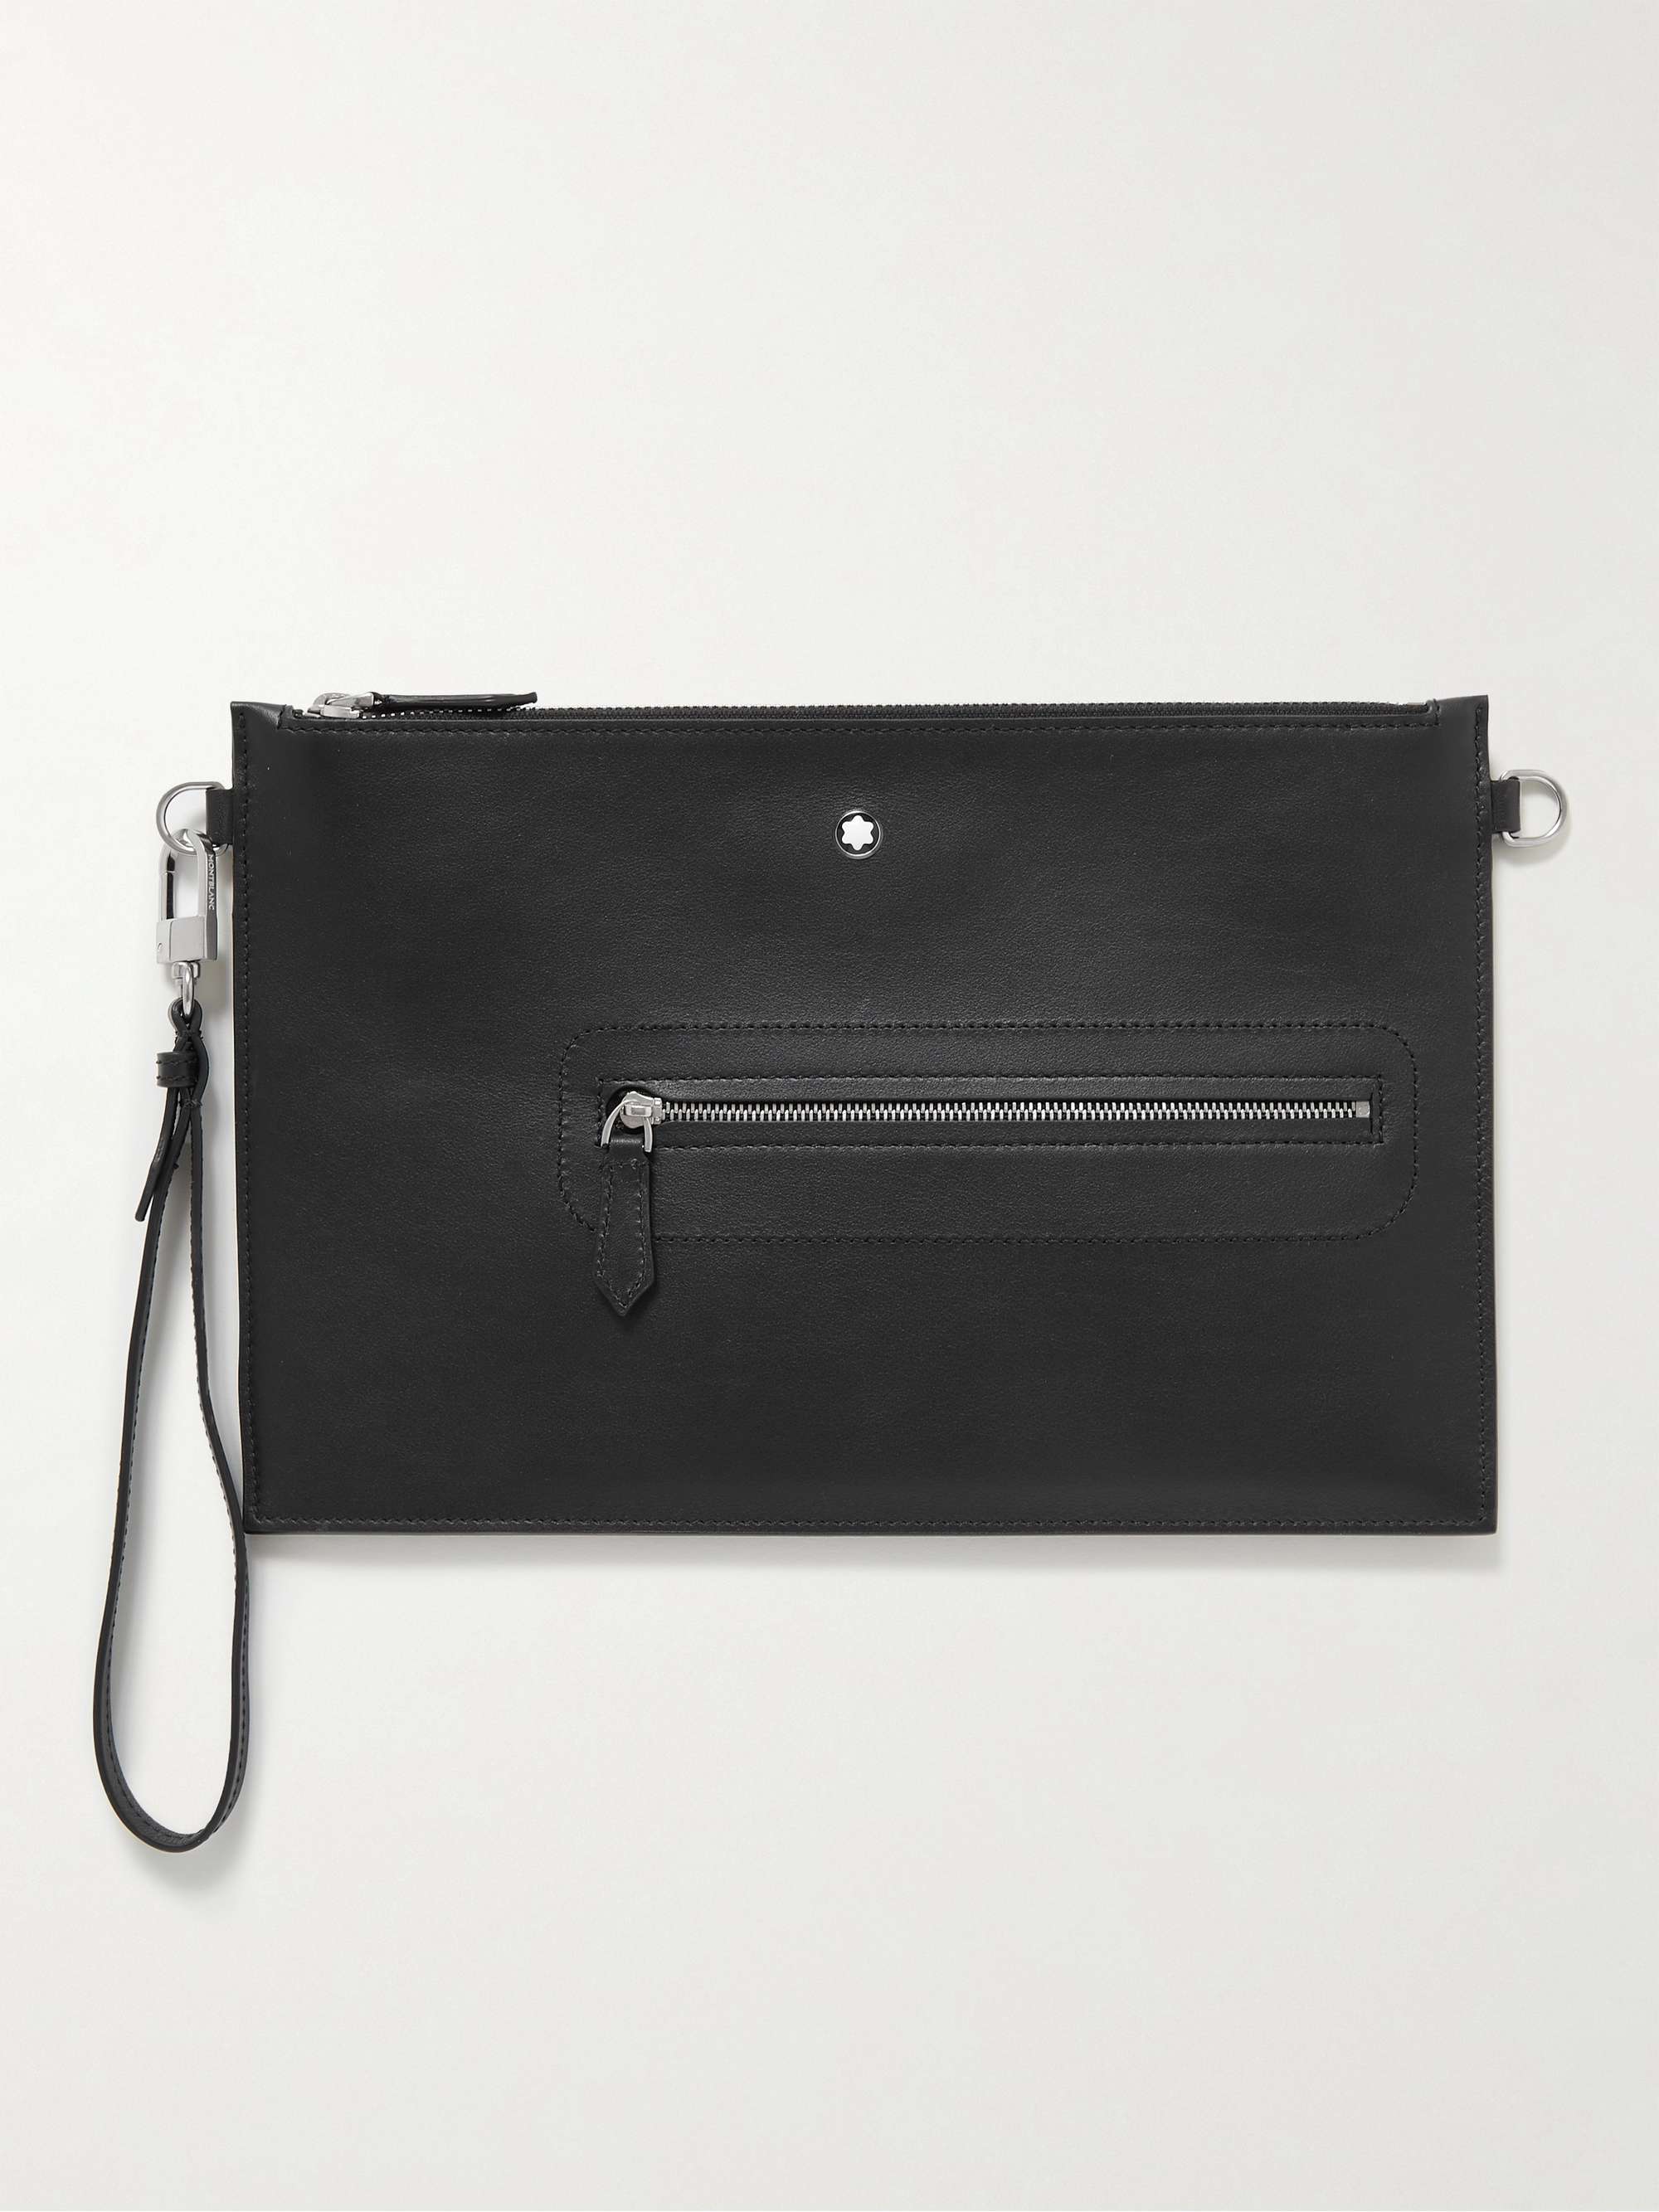 MONTBLANC Meisterstück Selection Leather Pouch